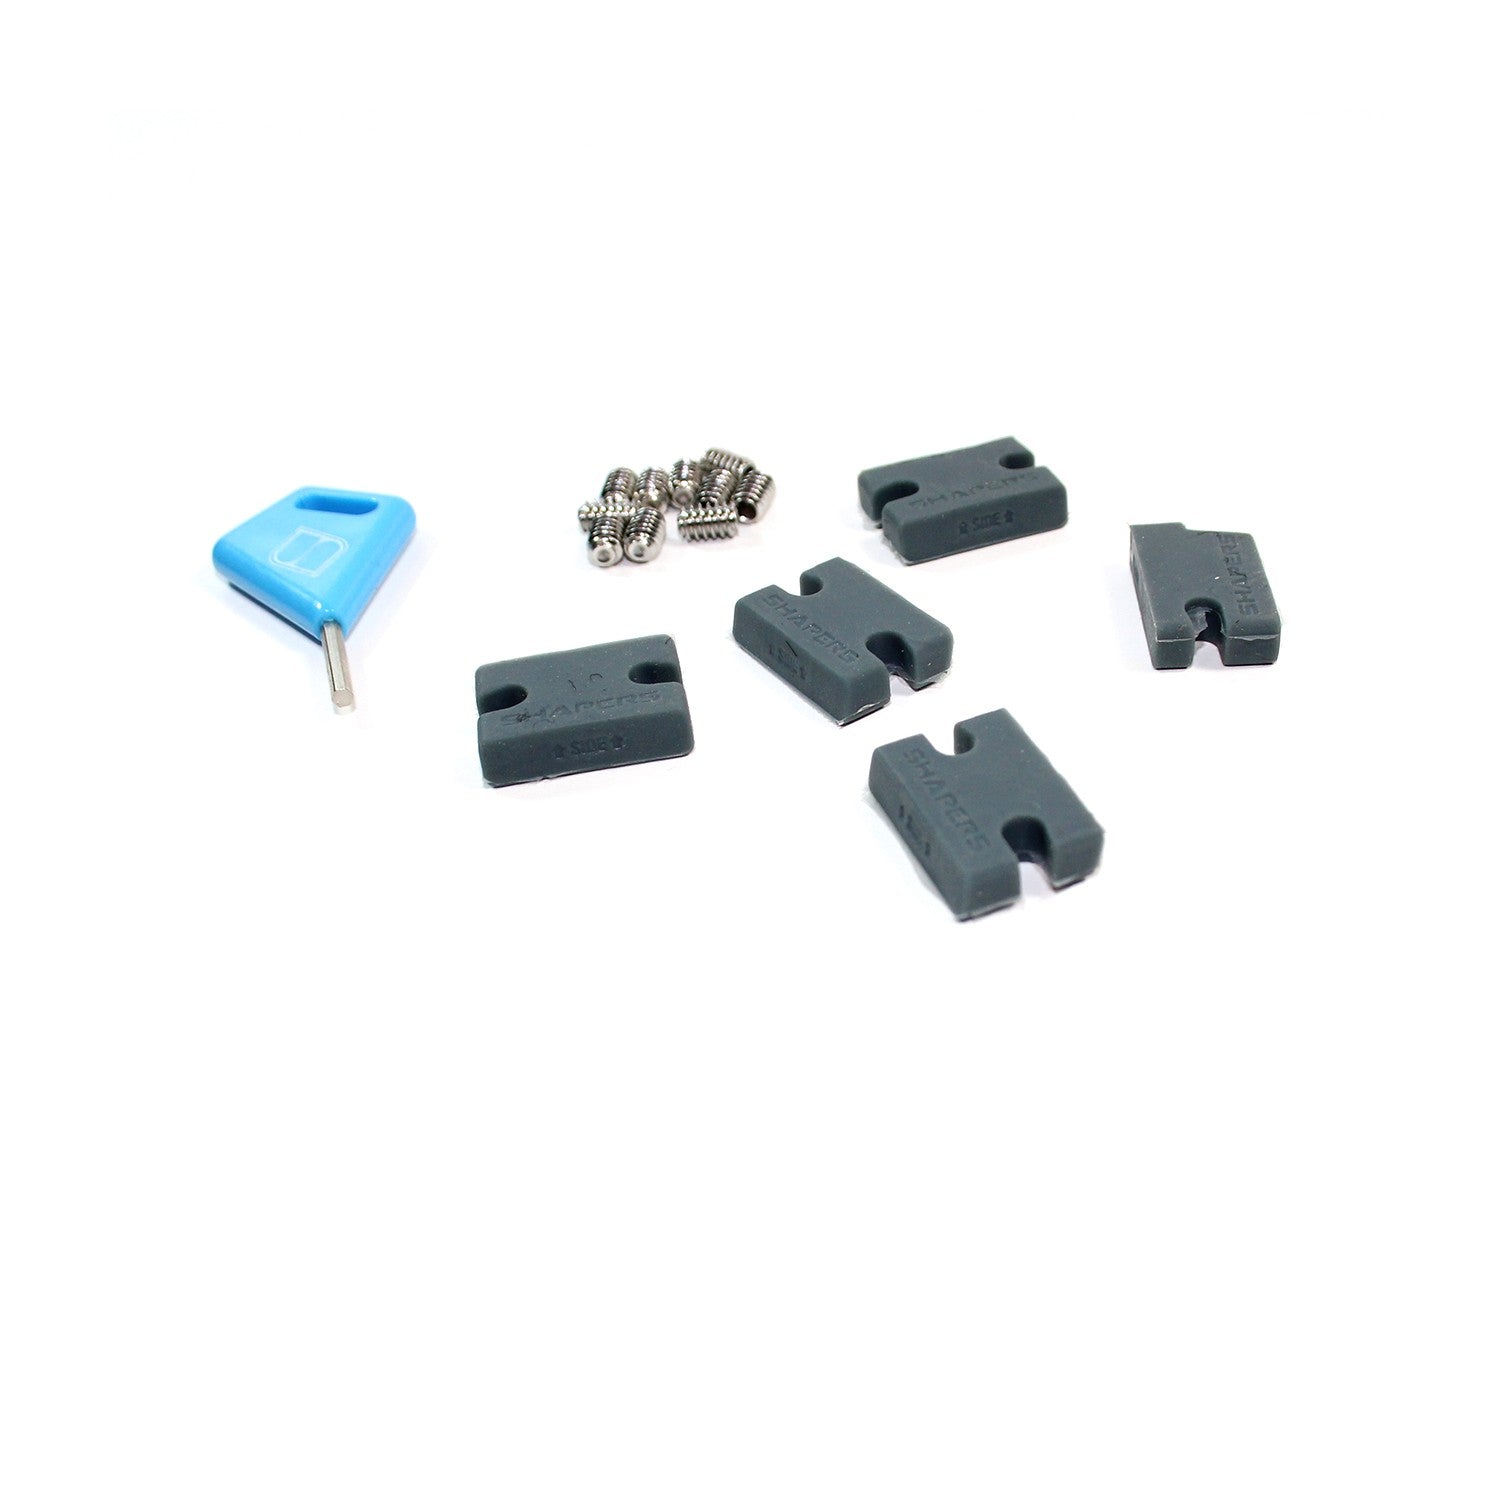 SHAPERS FCS II Compatibility Kit - Infill Kit